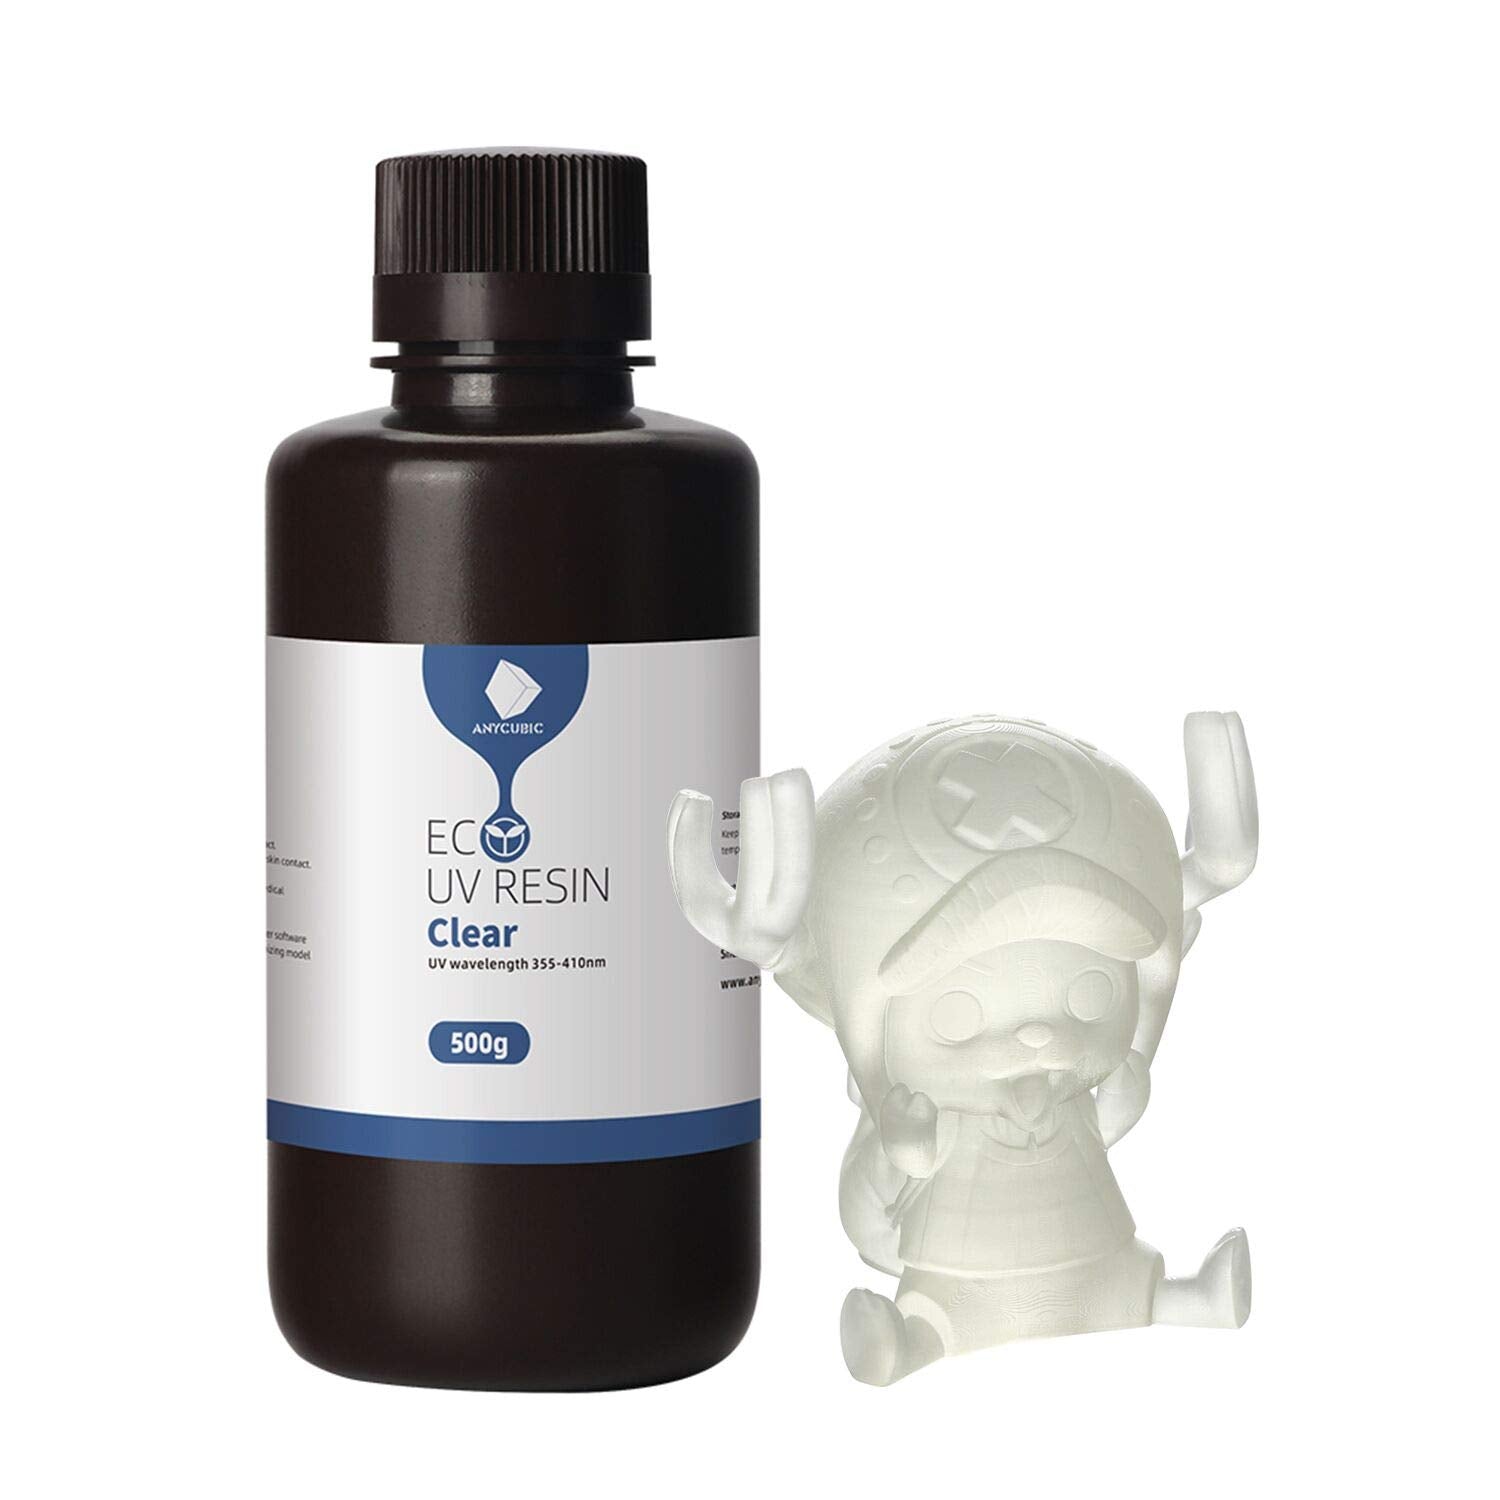 Anycubic Plant-based UV Resin